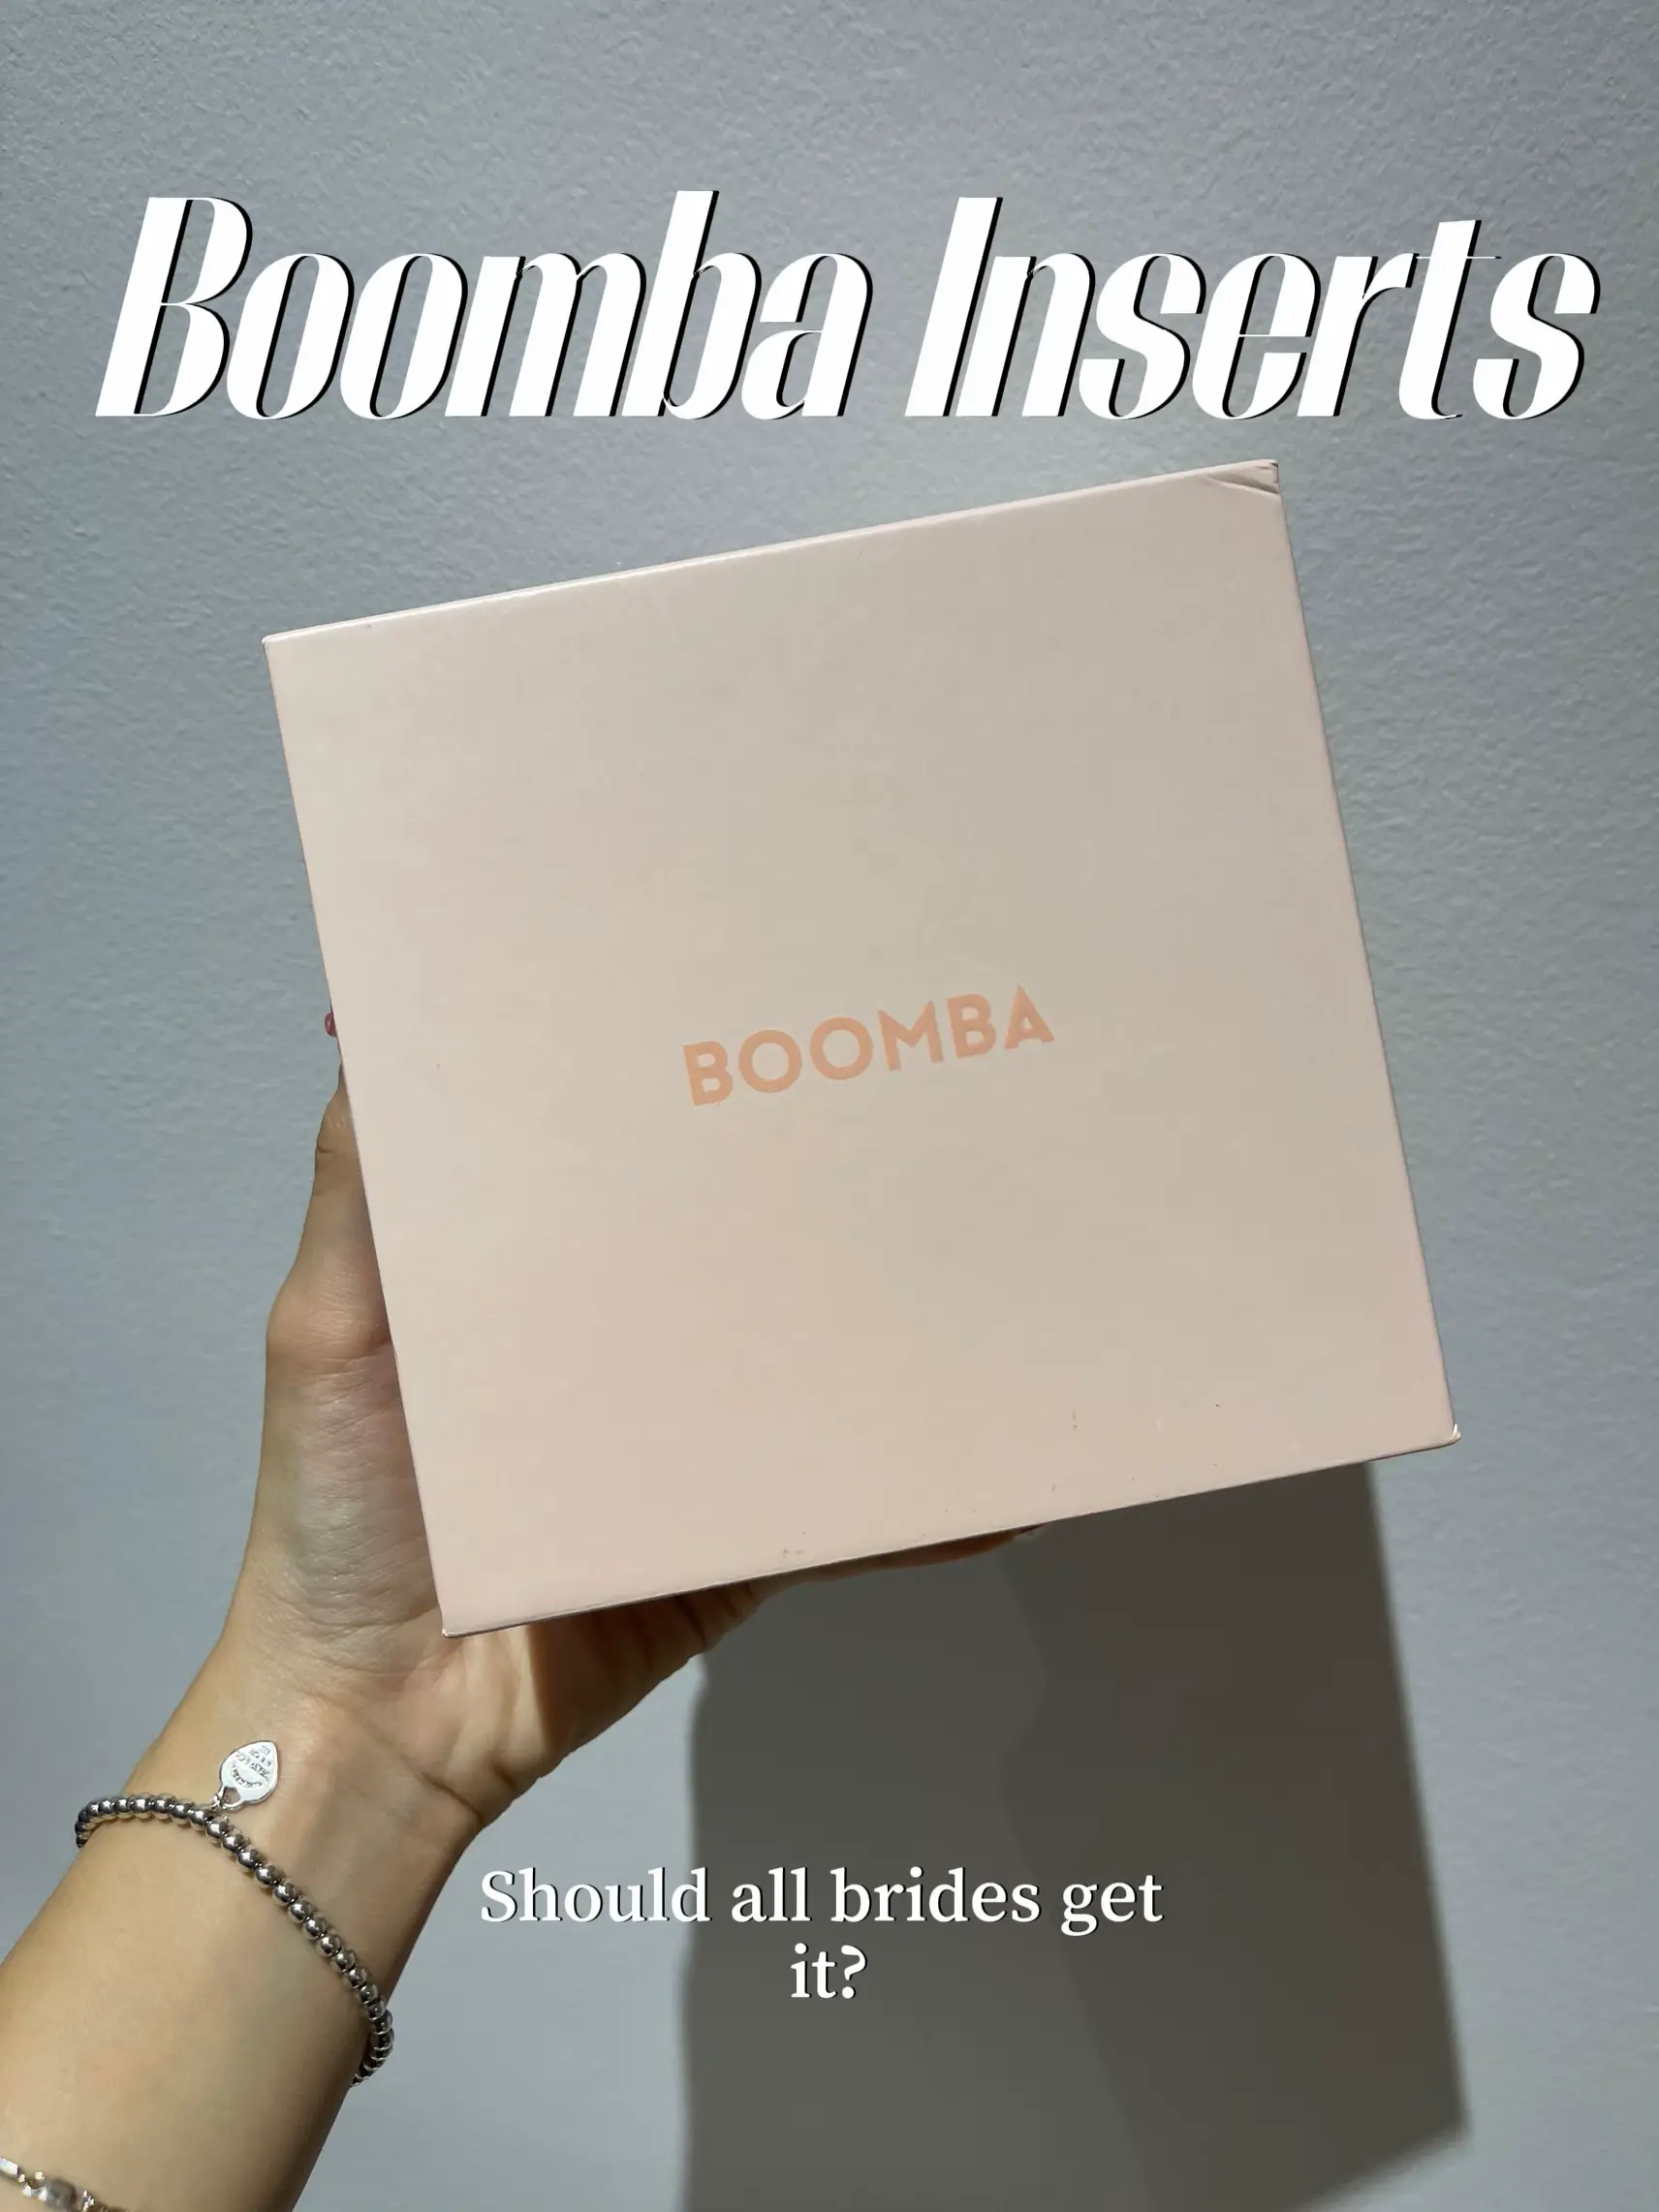 BOOMBA UNBOXING + REVIEW 